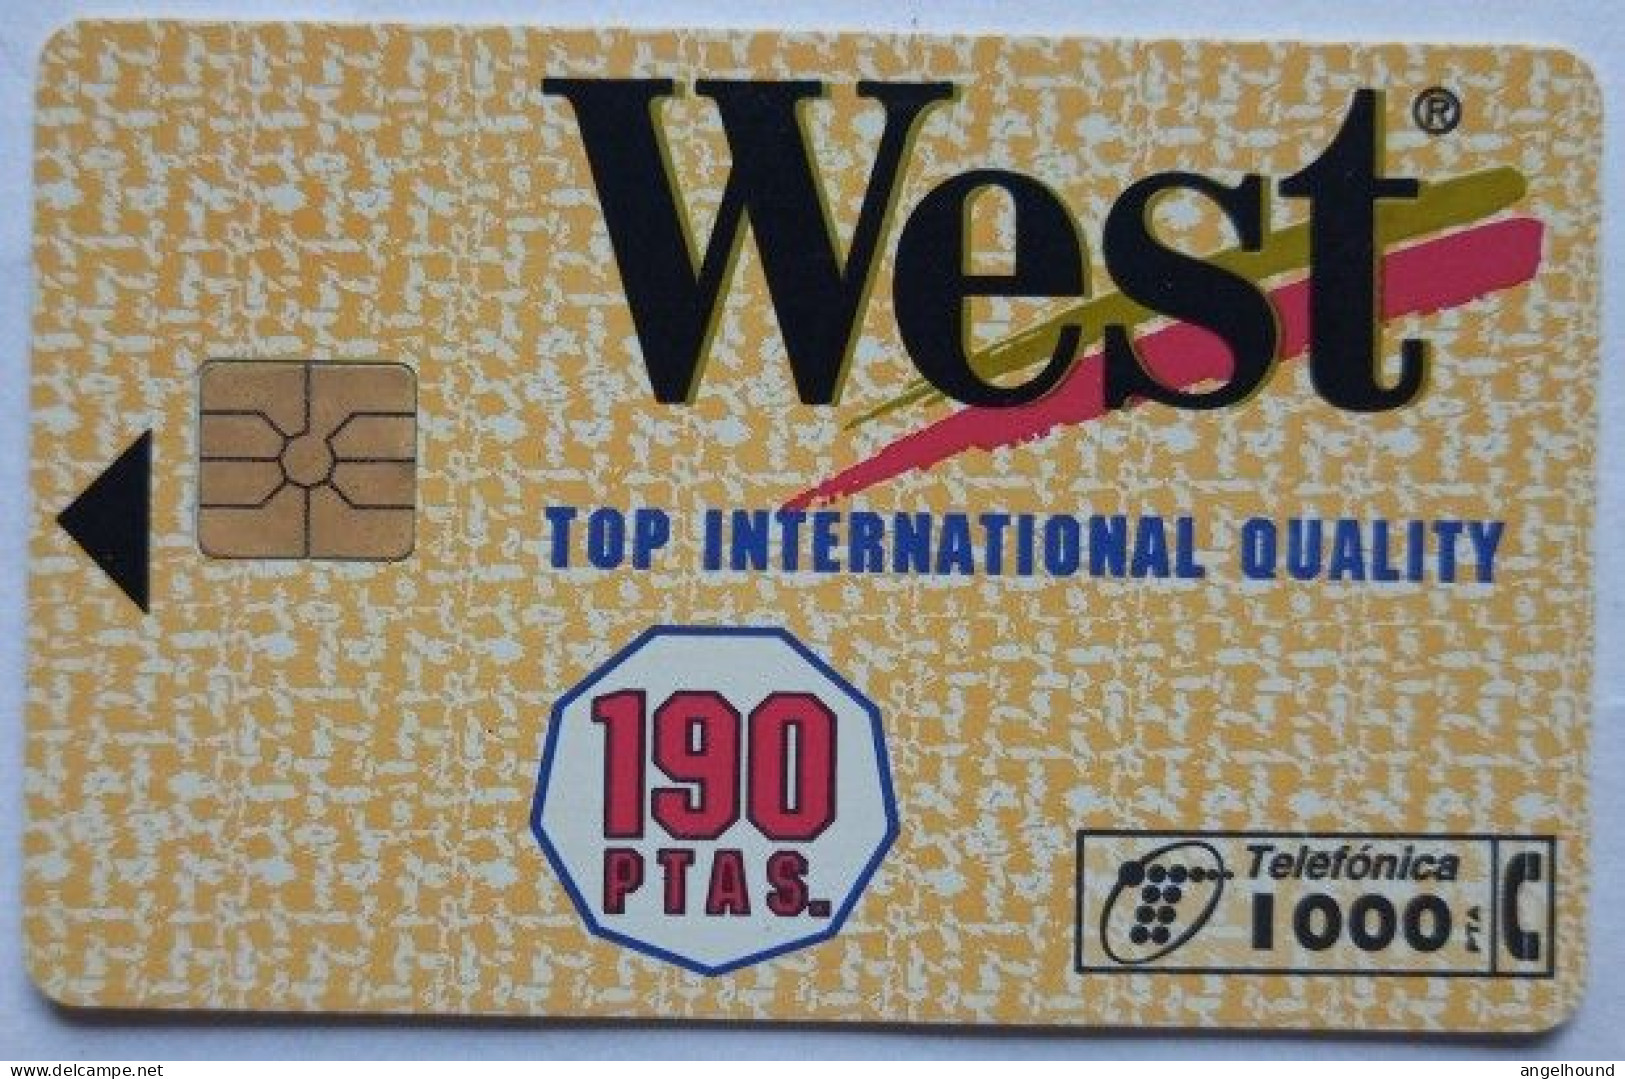 Spain 1000 Pta. Chip Card - West - Basic Issues